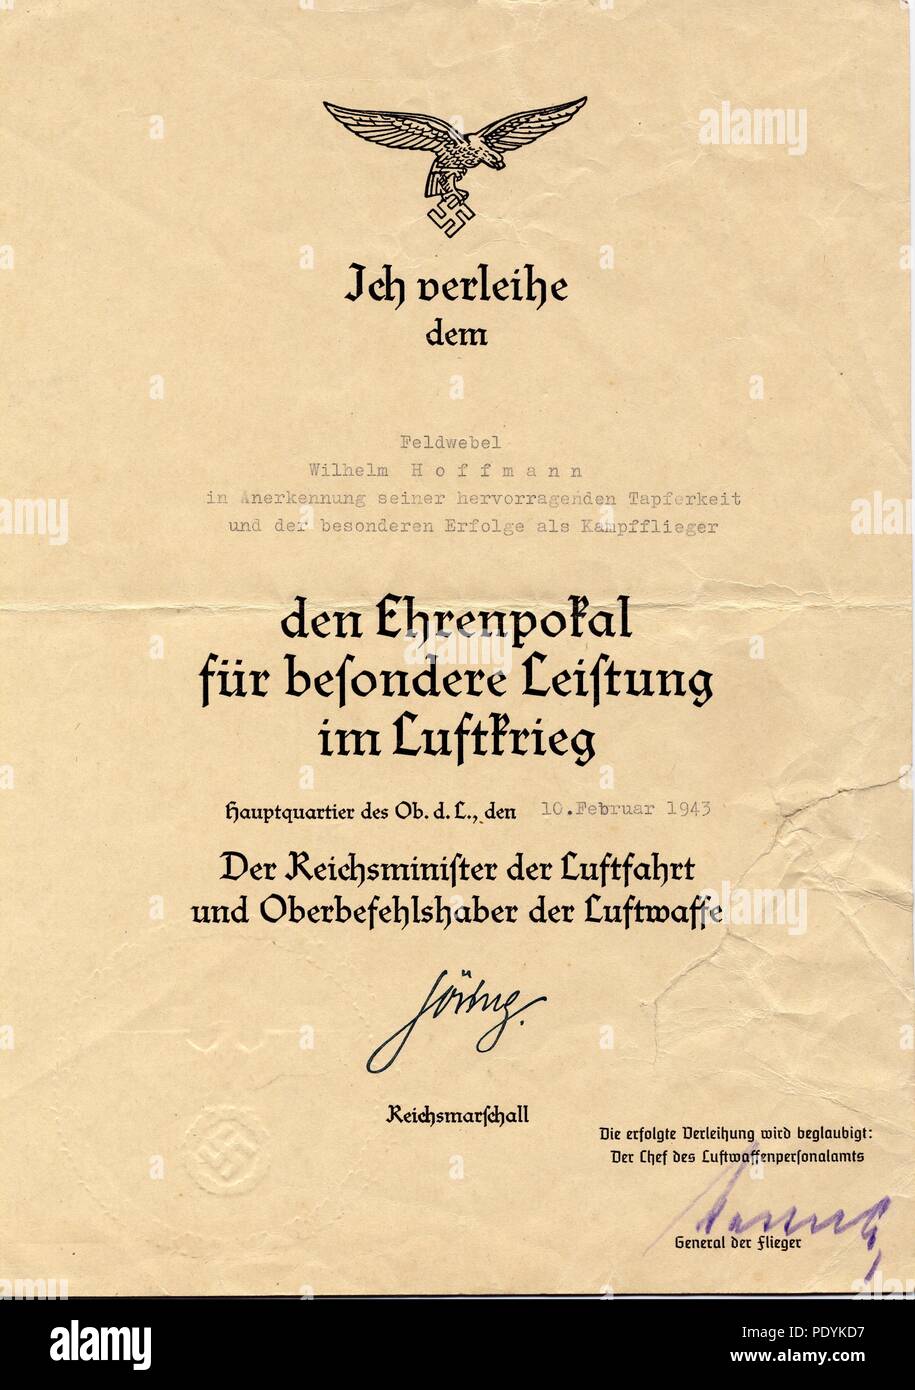 Certificate awarded to Feldwebel Willi Hoffmann of 5. Staffel, Kampfgeschwader 30: Certificate for the Goblet of Honour, awarded posthumously to Willi Hoffmann on 10th February 1943. It is facsimile signed by Hermann Göring and signed in crayon by General der Flieger Gustav Kastner-Kirdorf, Chef des Luftwaffenpersonalamts (Head of the Air Force Personnel Office). Willi Hoffmann and his crew failed to return from a mission in the Mediterranean on 23rd January 1943. Stock Photo